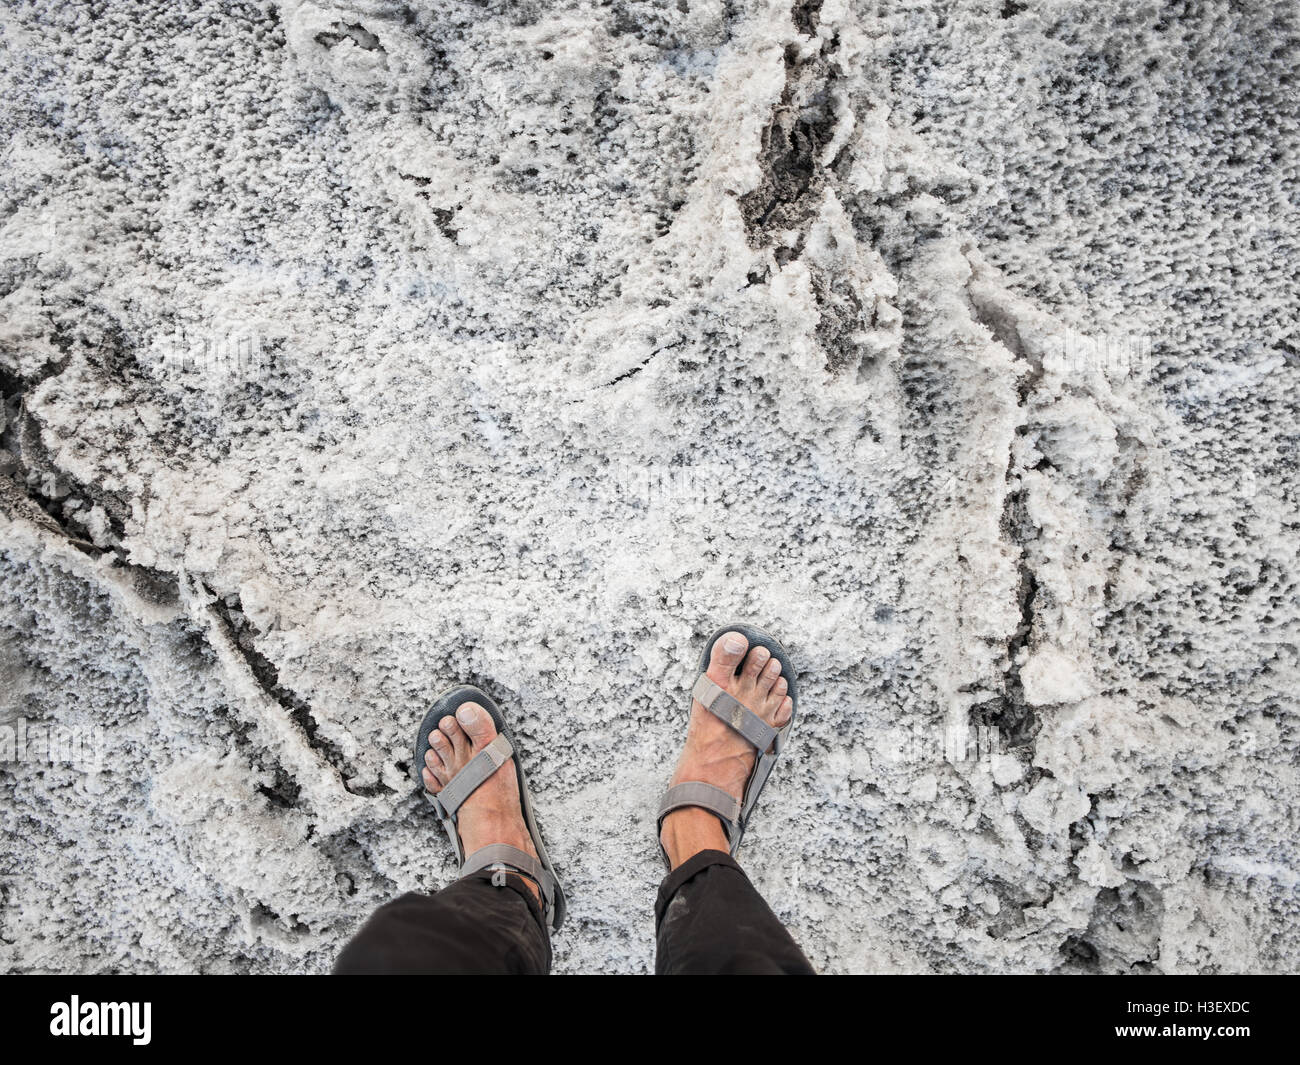 Salt at Badwater Basin in Death Valley National Park Stock Photo